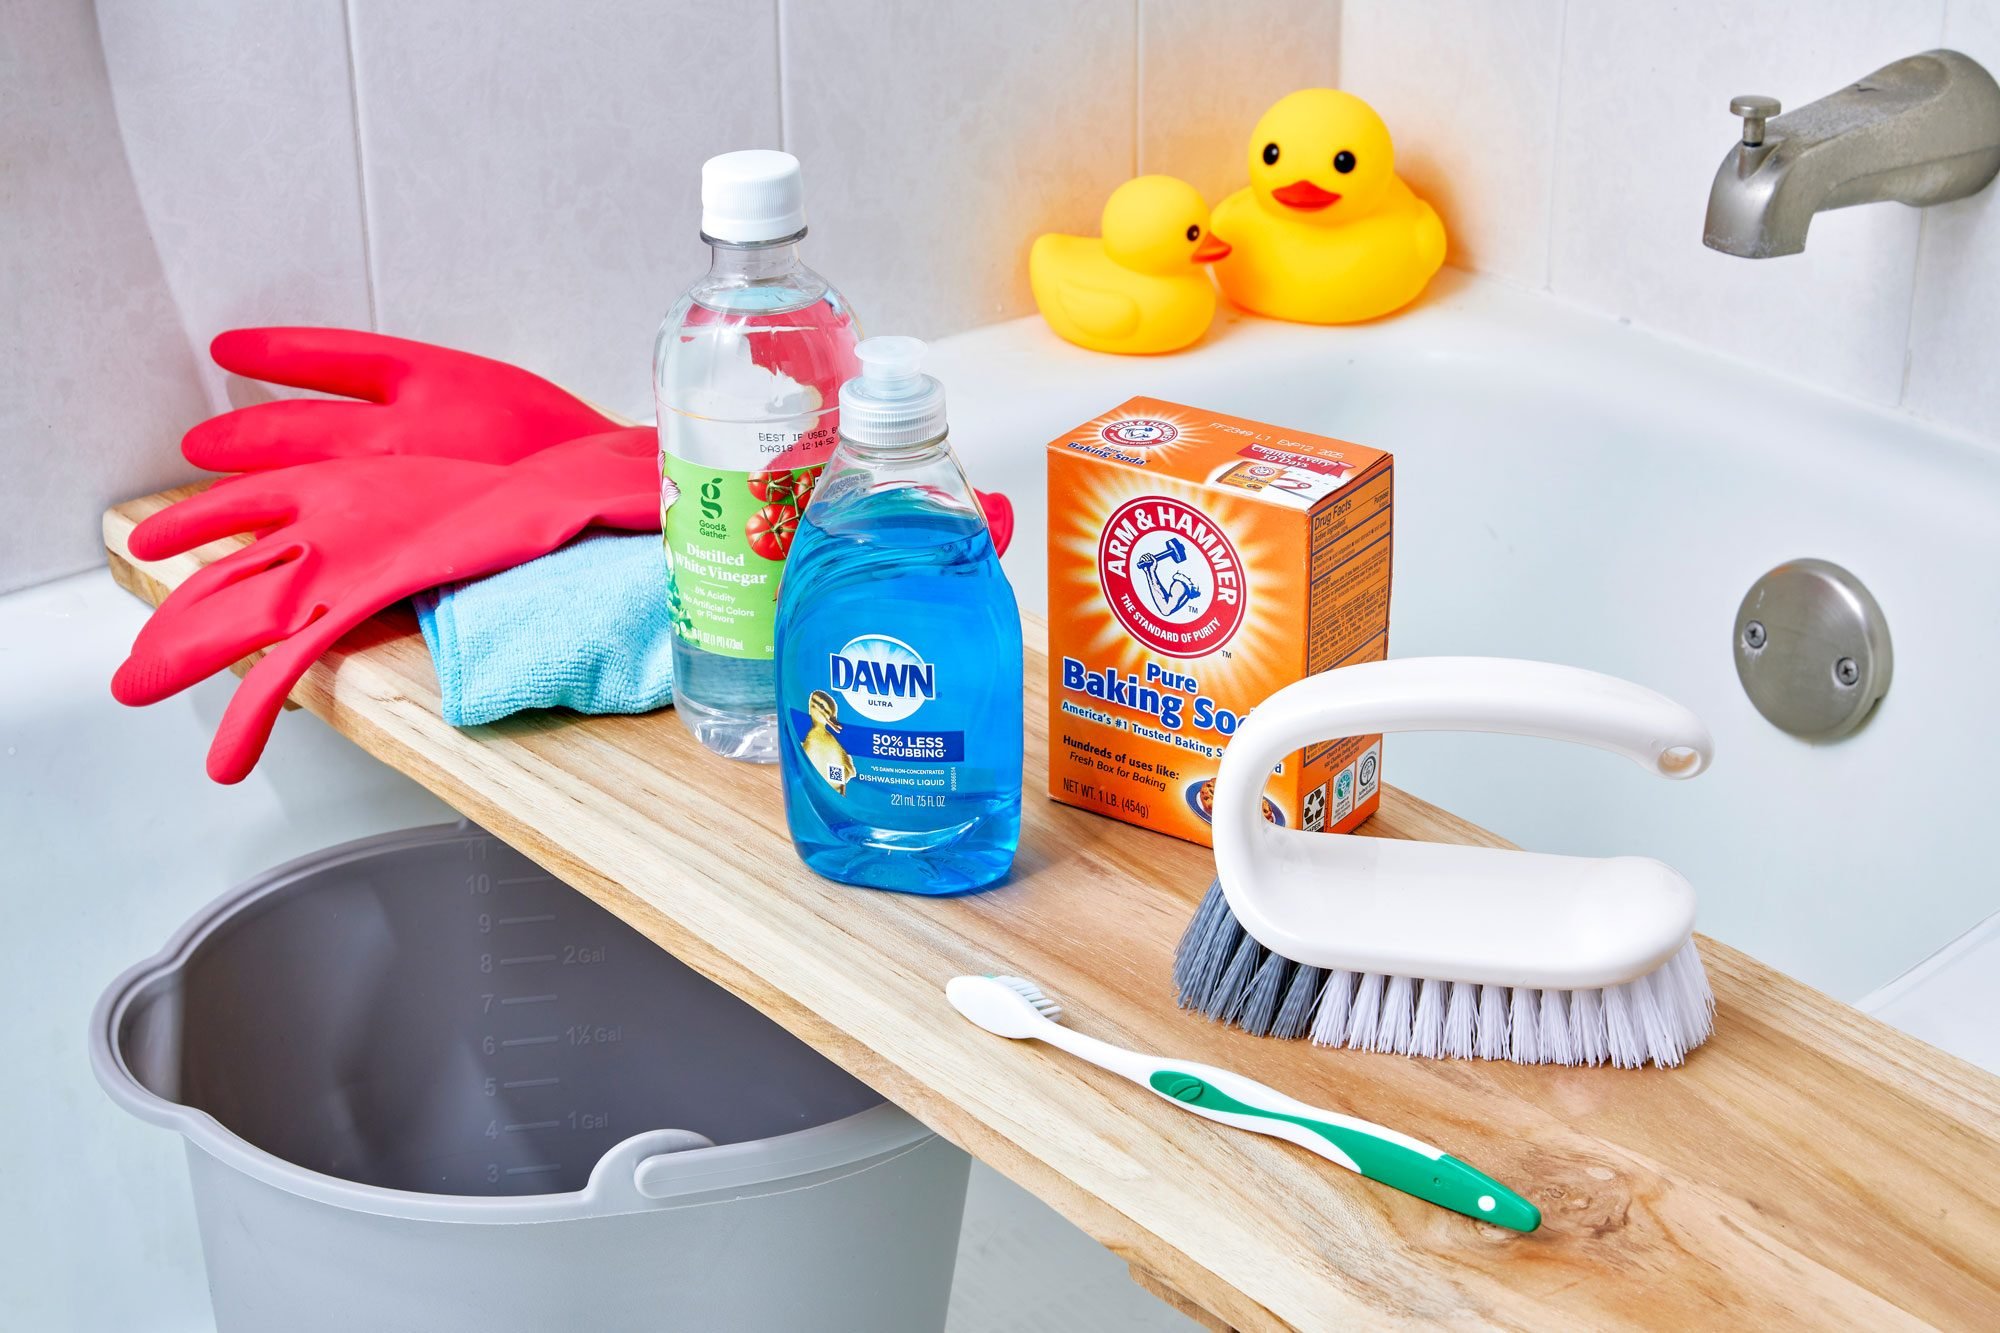 https://www.rd.com/wp-content/uploads/2023/02/How-to-Clean-a-Bathtub-RDD23_CleaningHub_KS_03_10_018-supplies-FT.jpg